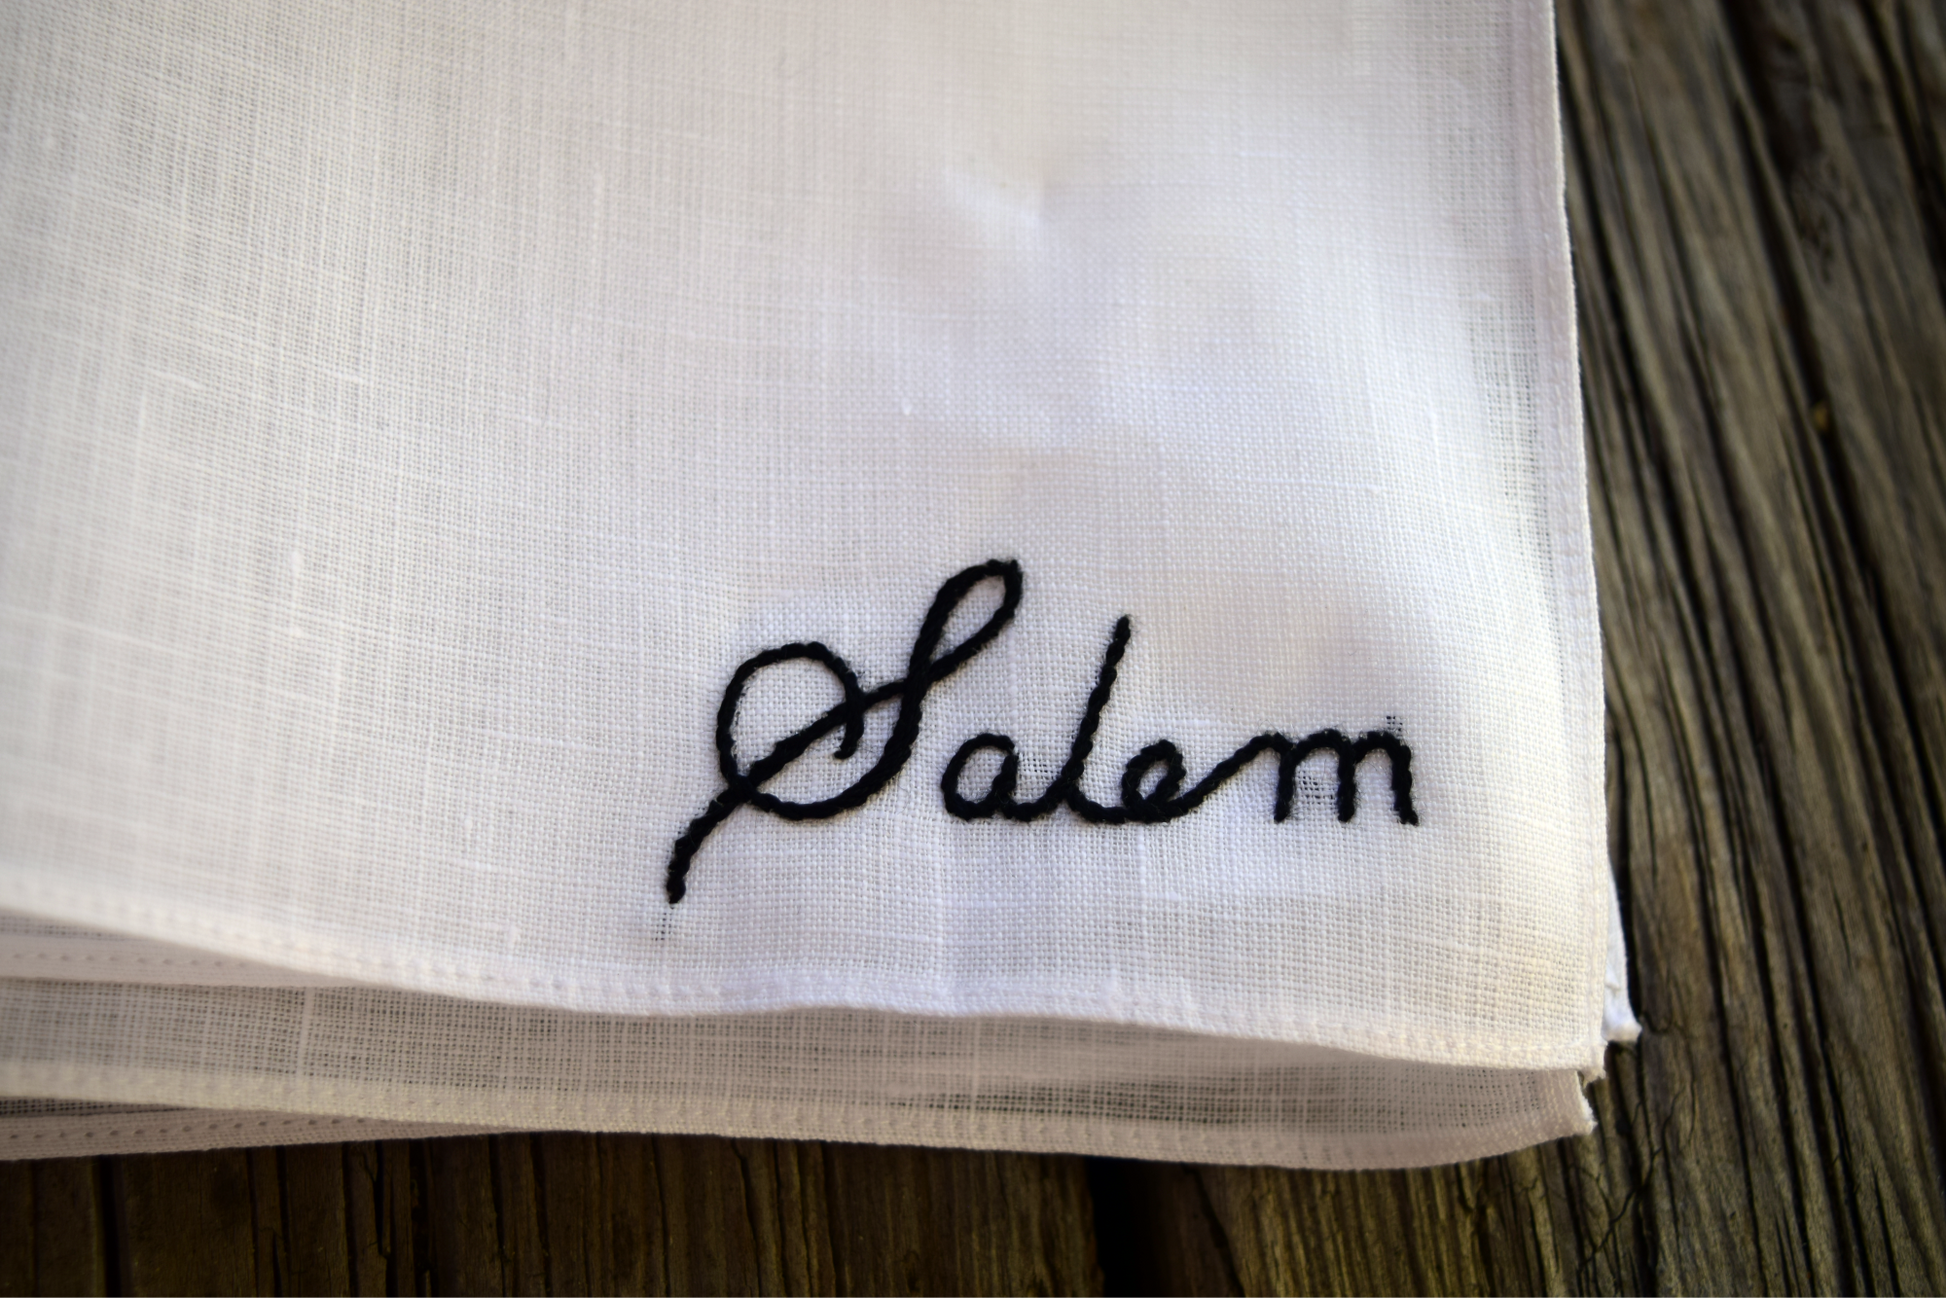 Close up of hand embroidered handkerchief, showing stitches